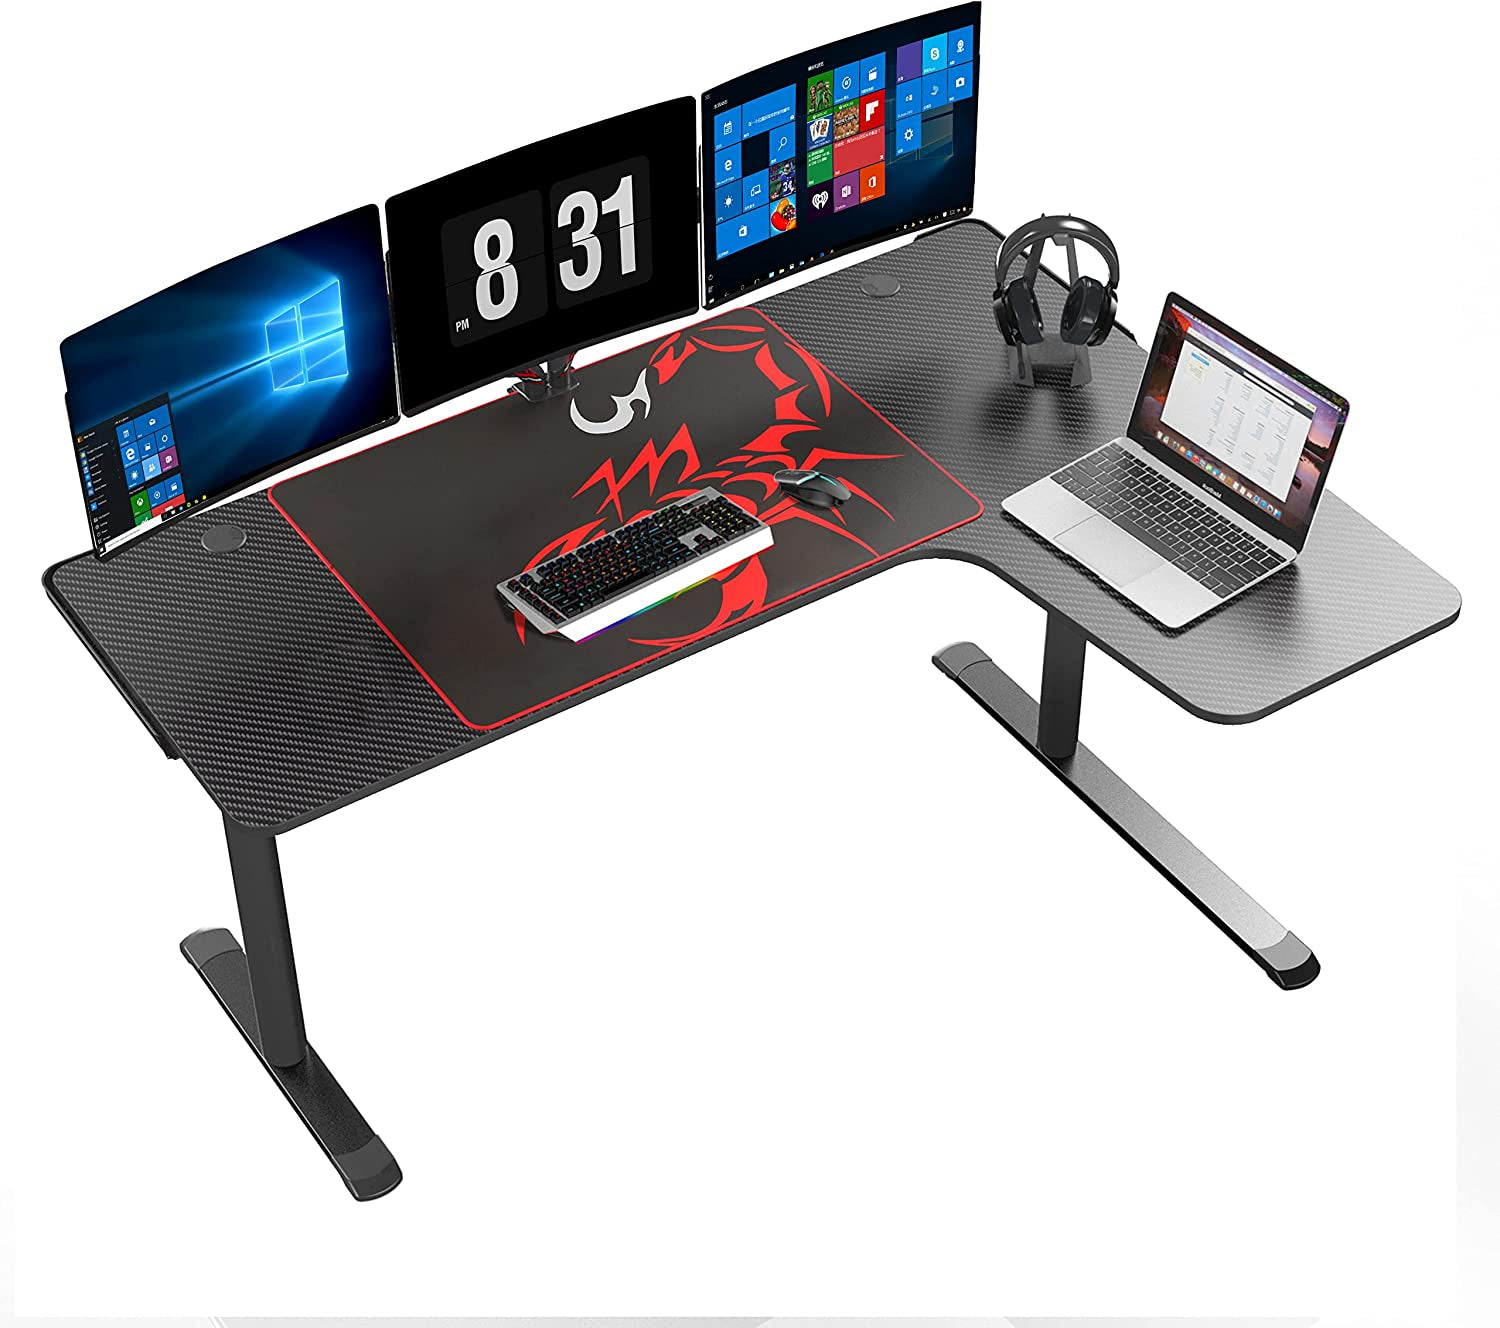 L Shaped Gaming Desk, 60 Inch L60 Home Office Corner PC Computer Gamer Table Large Writing Workstation Gifts W Mouse Pad Cable Management, Space Saving, Easy to Assemble, Right Black